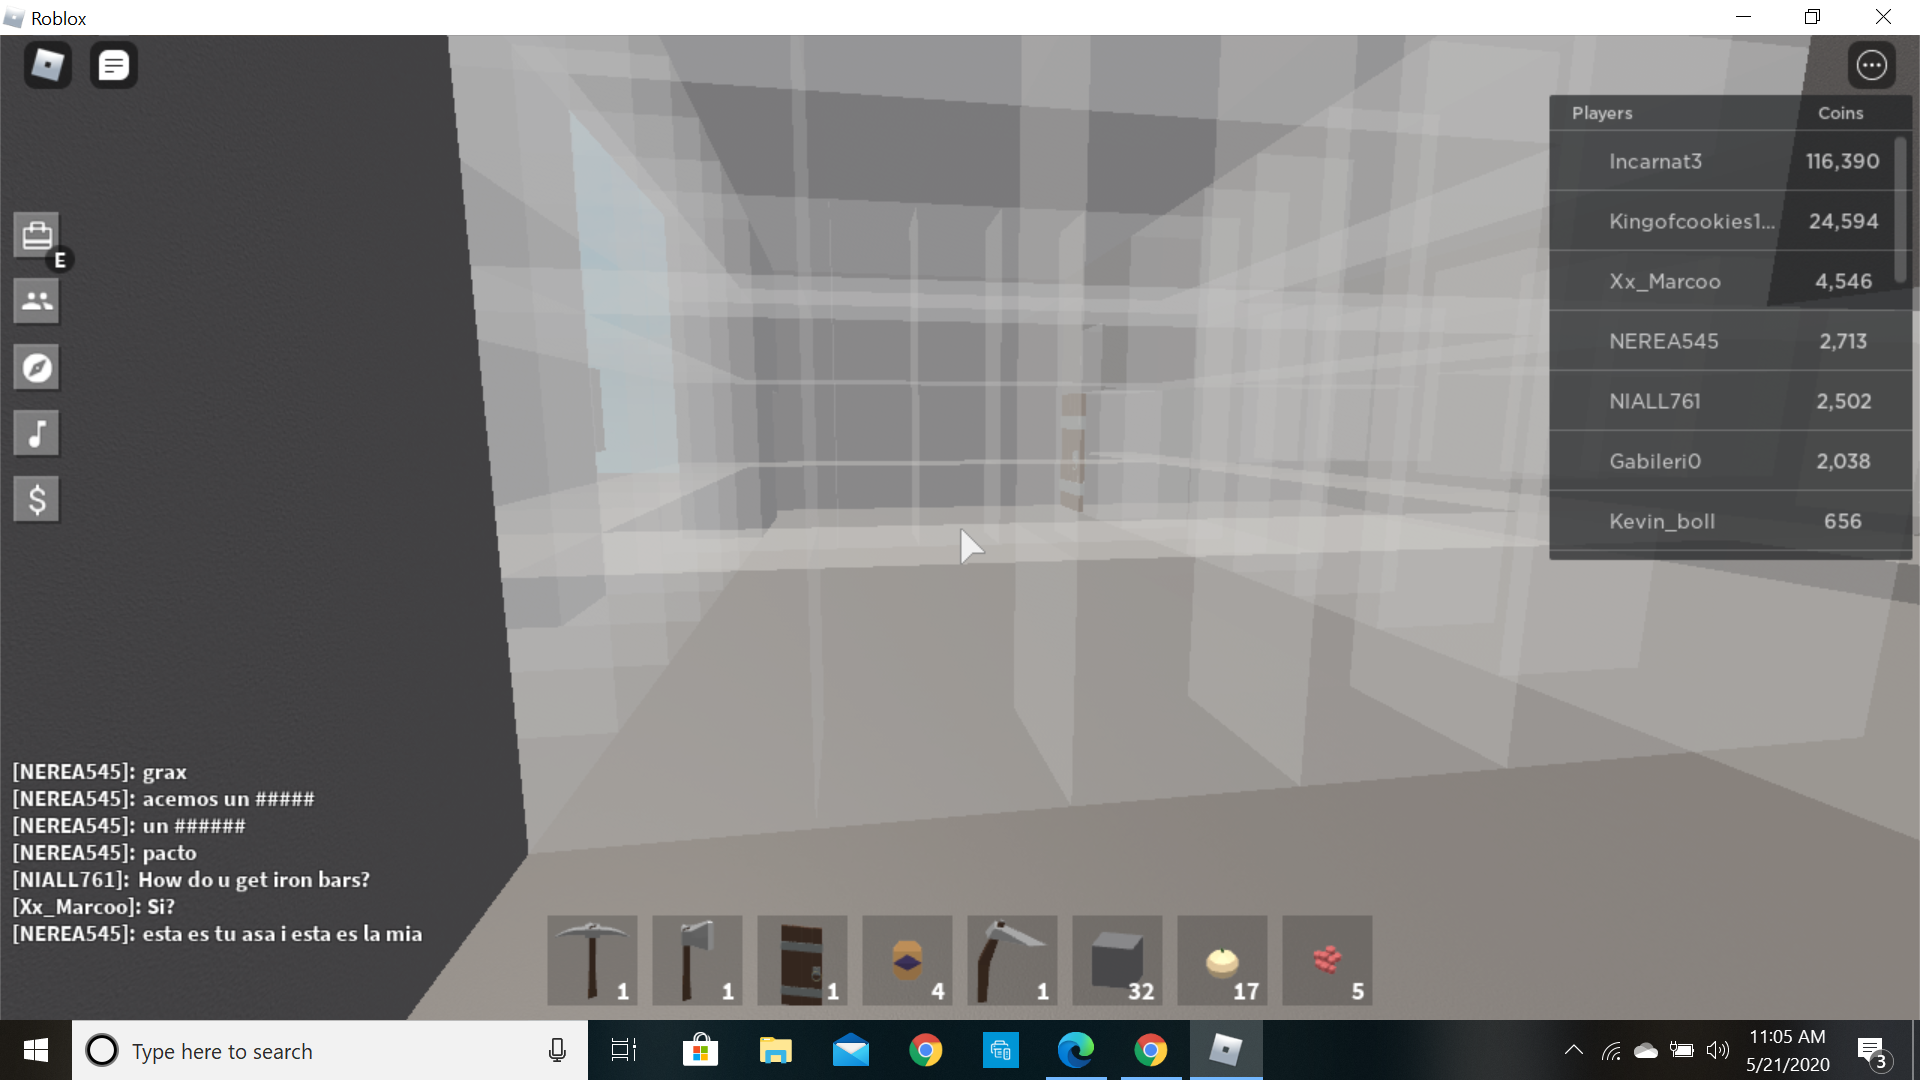 I Made A Scammer Proof Trading Building Updated To Prevent Grabbing Items Through The Glass Fandom - how to make glass in roblox skyblock